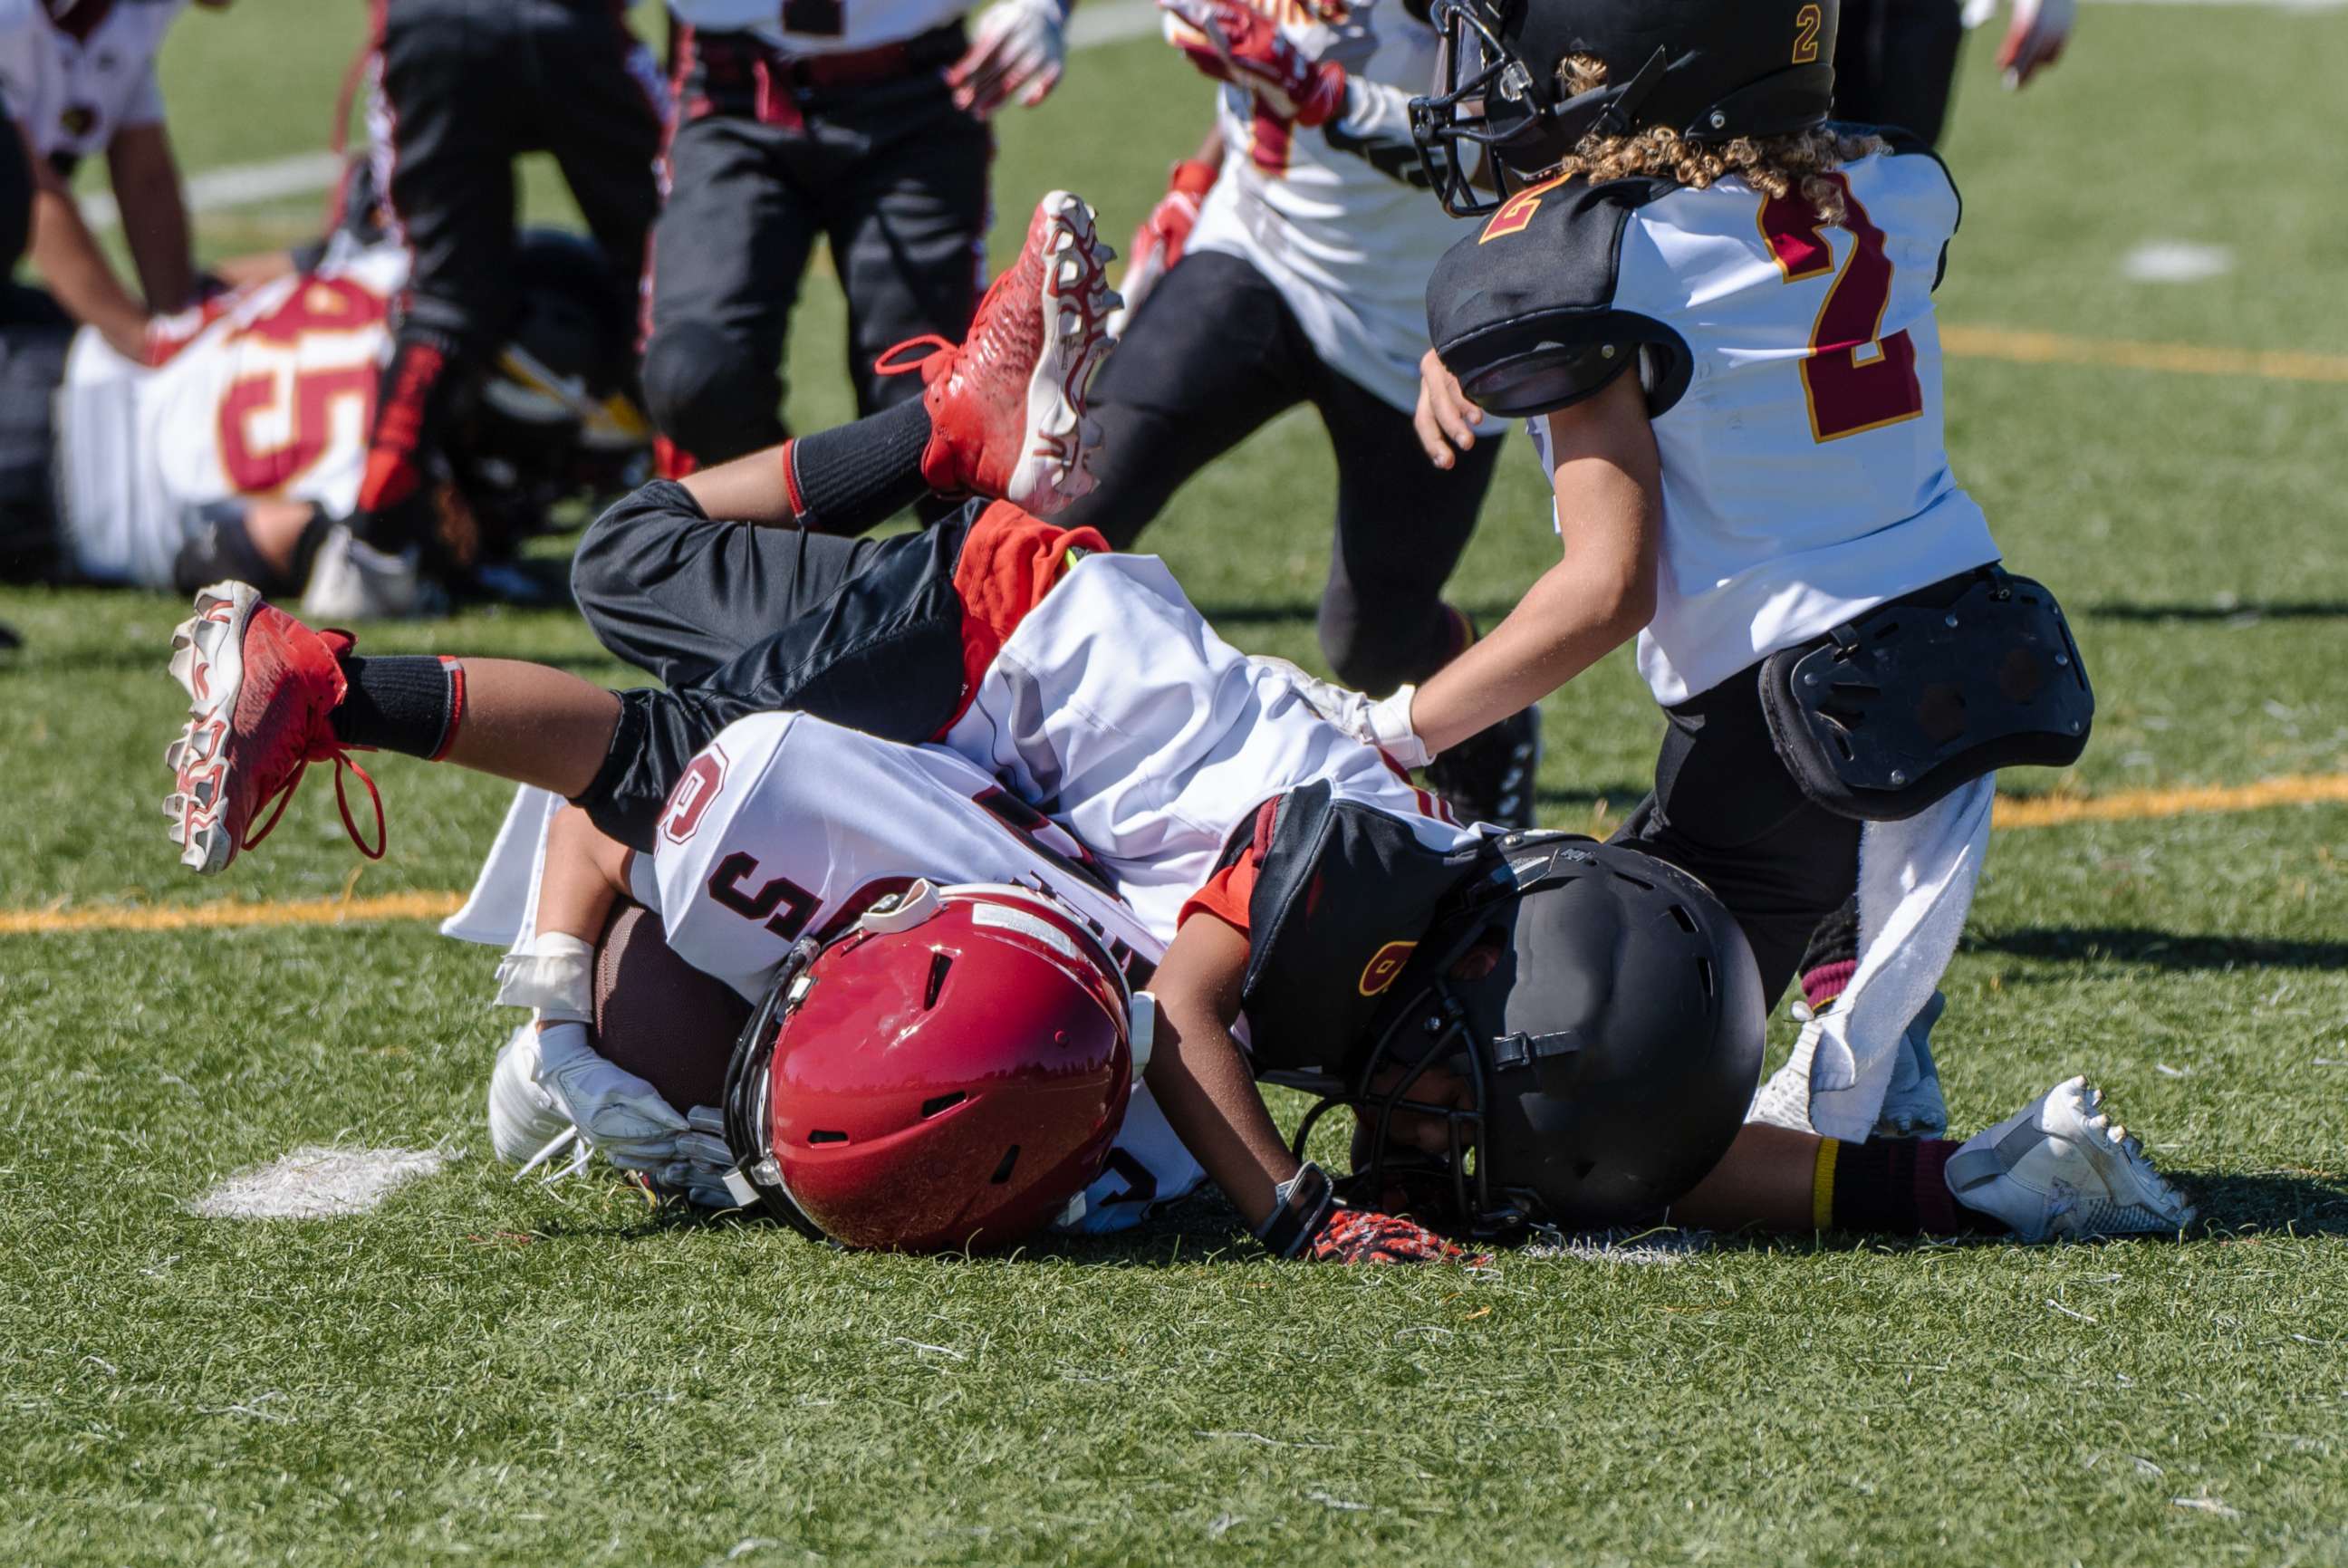 PHOTO: A youth football player is tackled and at bottom of a pile during a game.